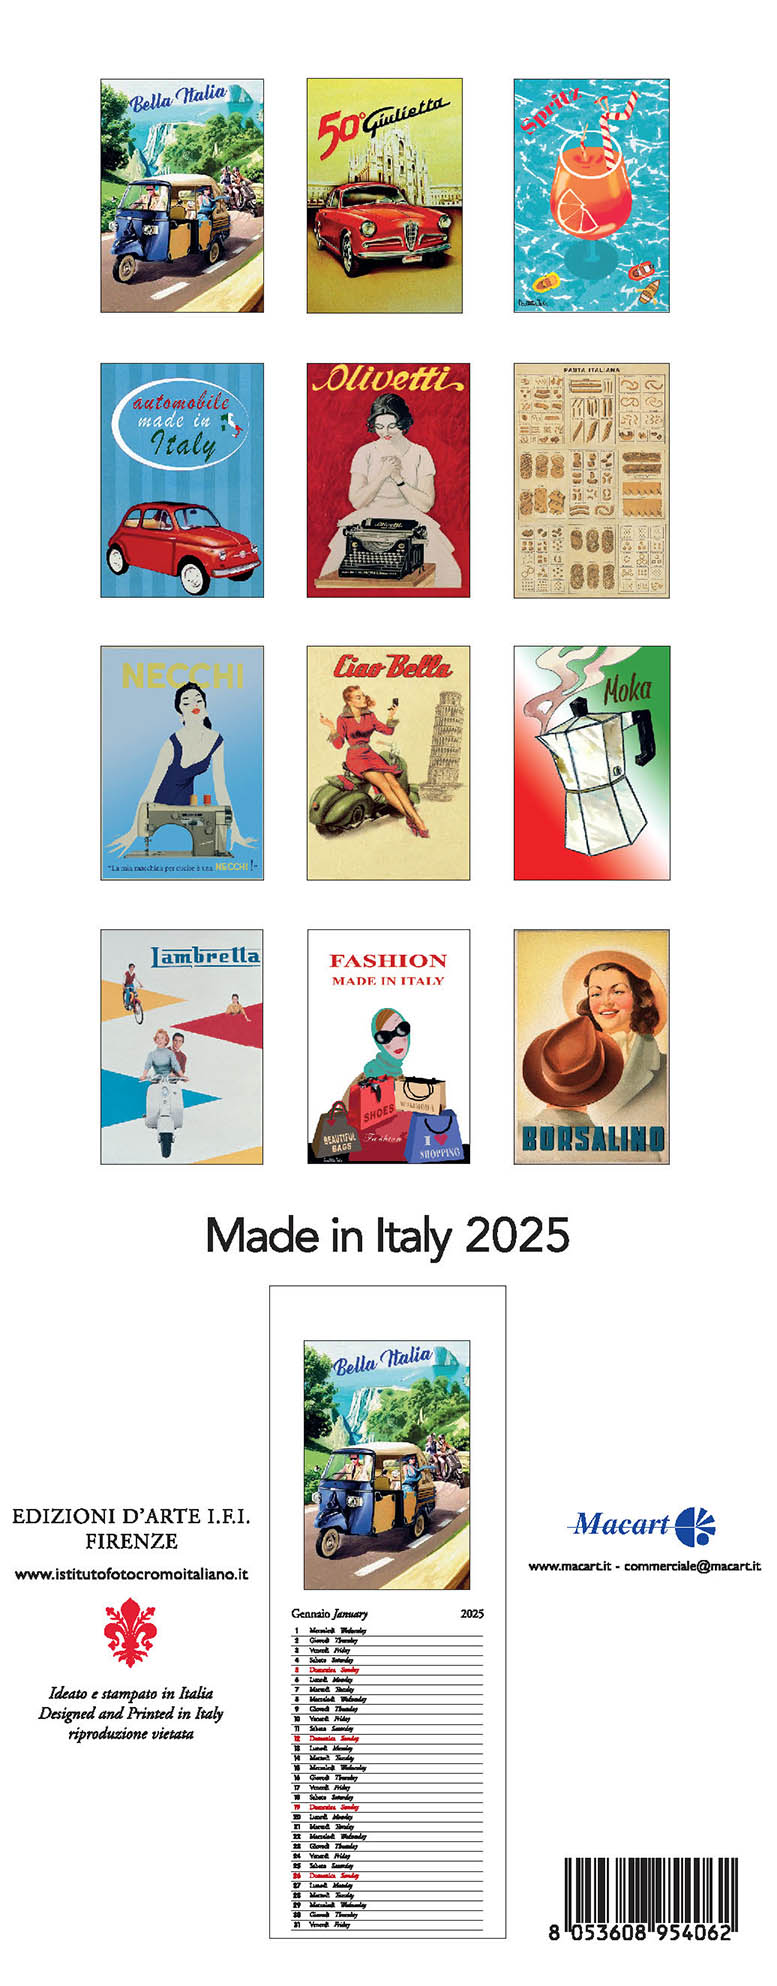 Made in Italy 2025 